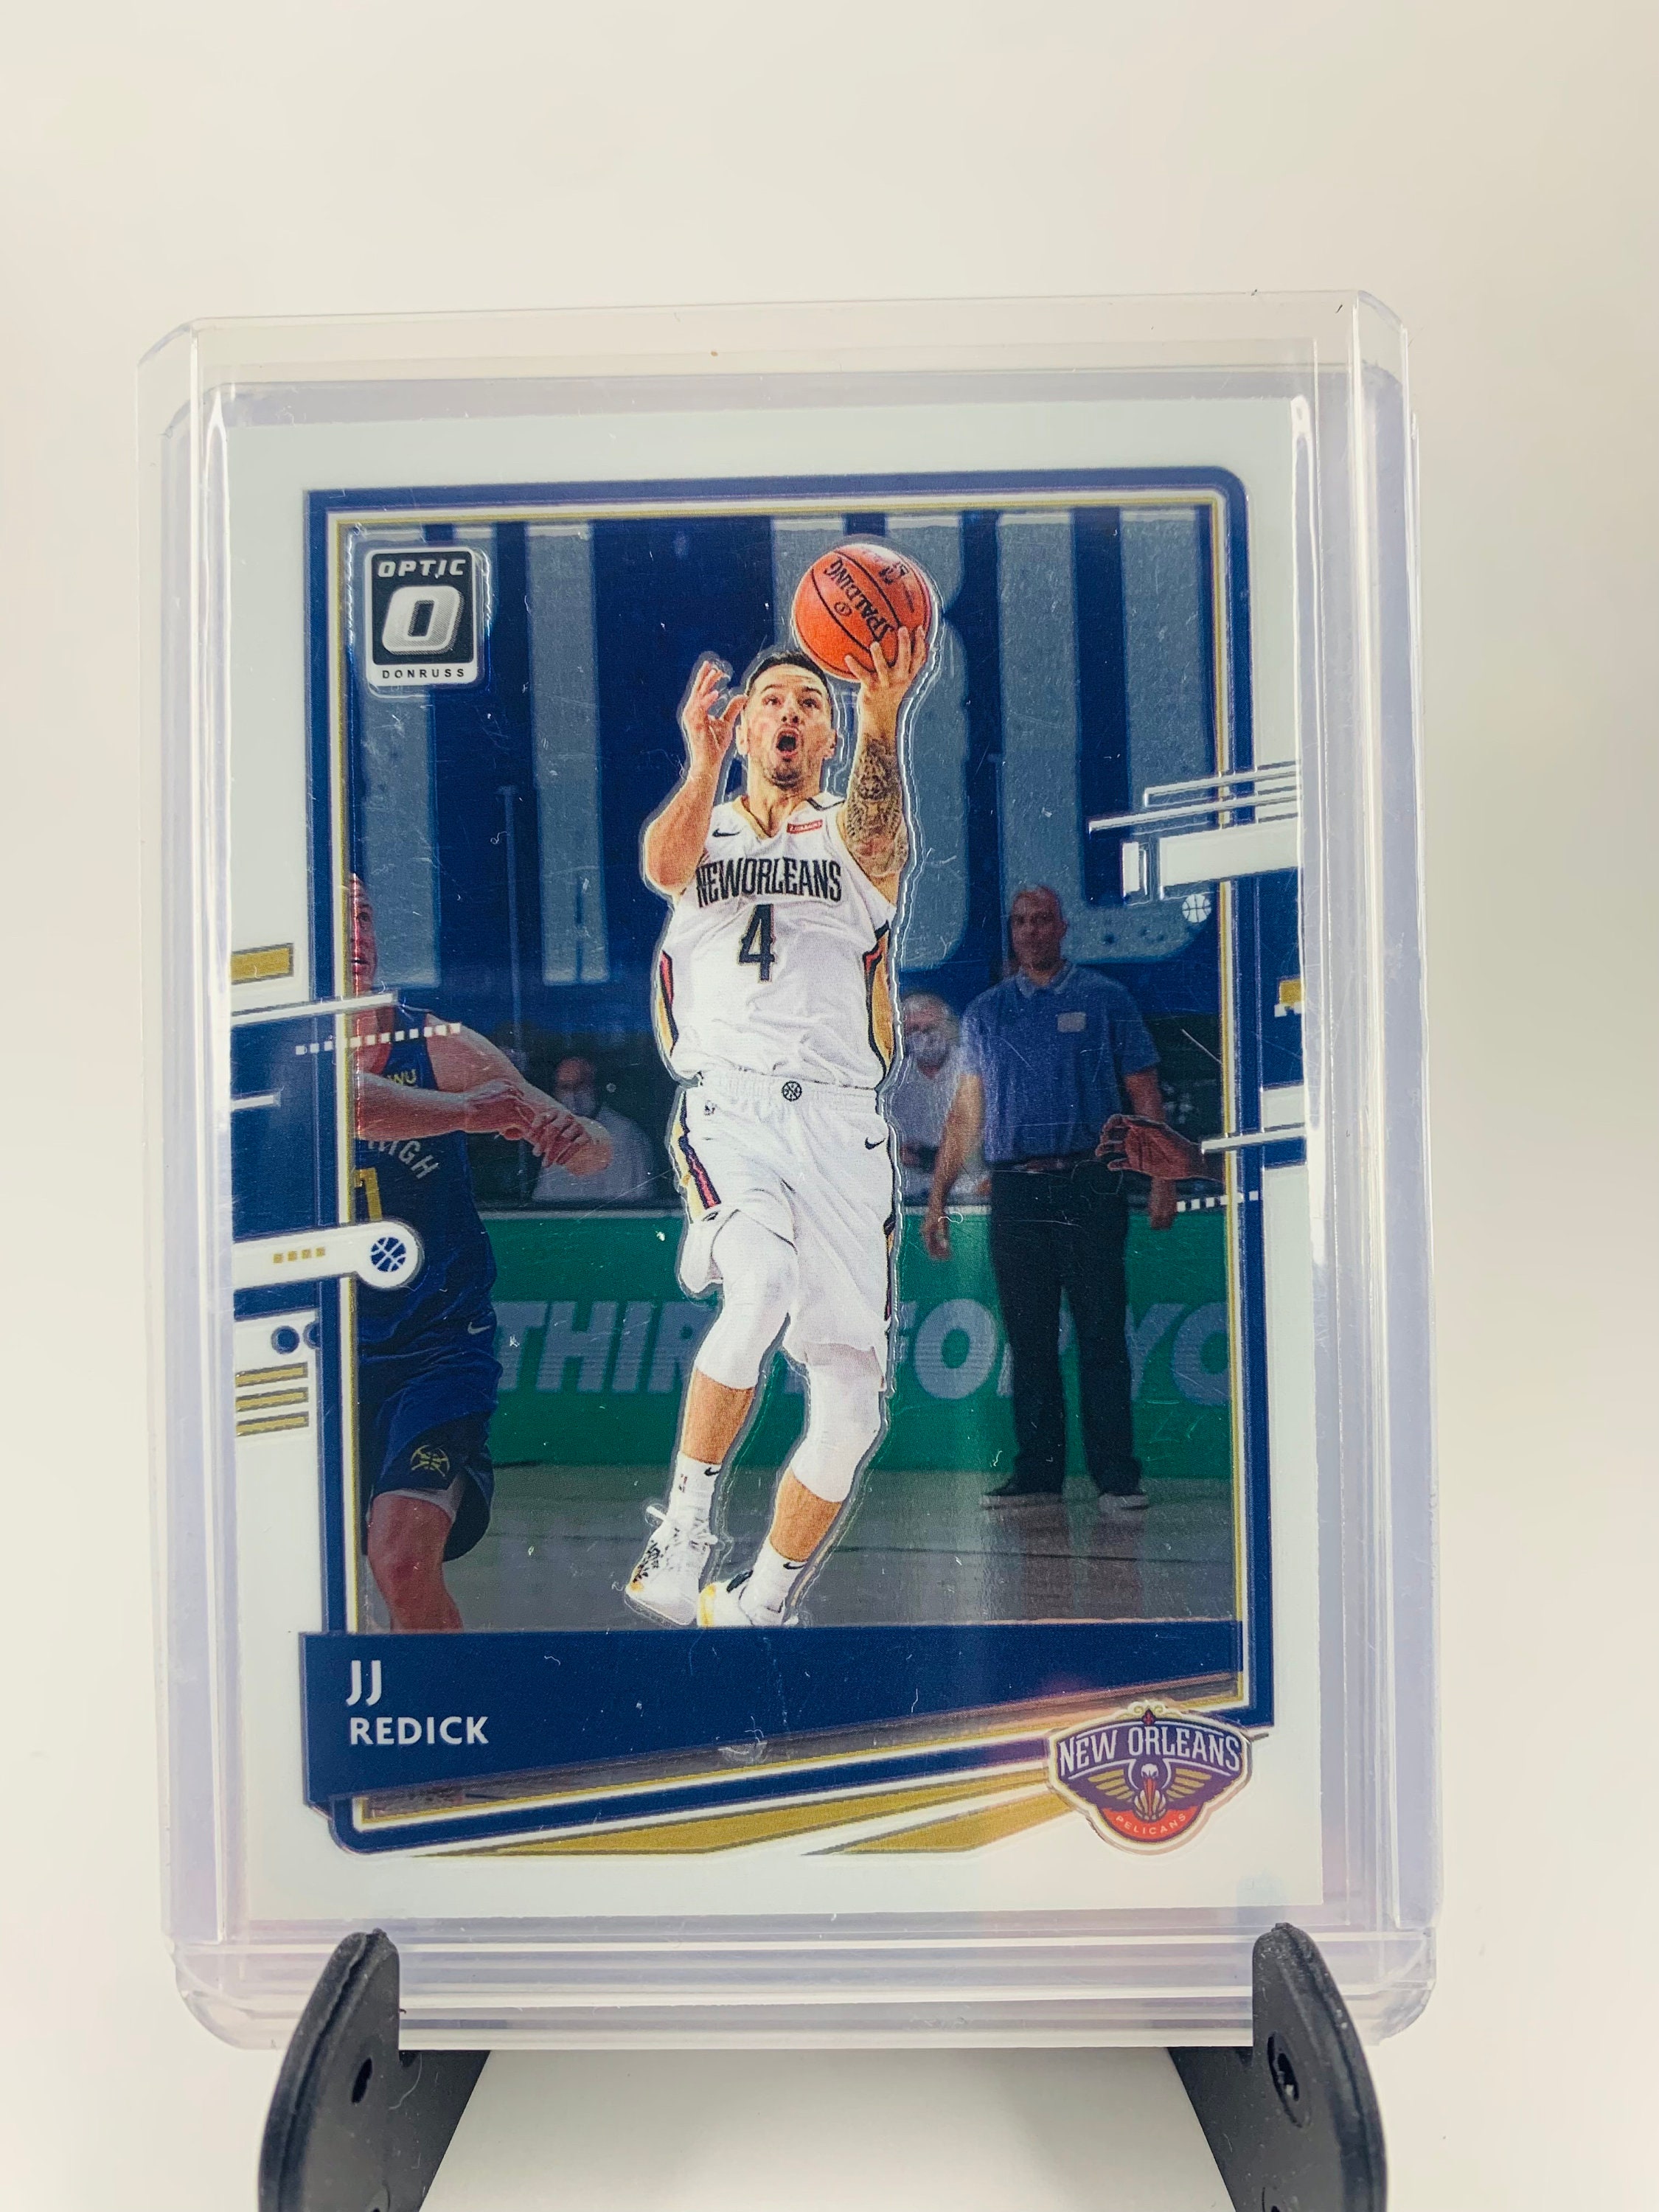  Stephen Curry 2021 2022 Donruss Complete Players Basketball  Series Mint Insert Card #7 Picturing Him in His White and Blue Golden State  Warriors Jerseys : Collectibles & Fine Art